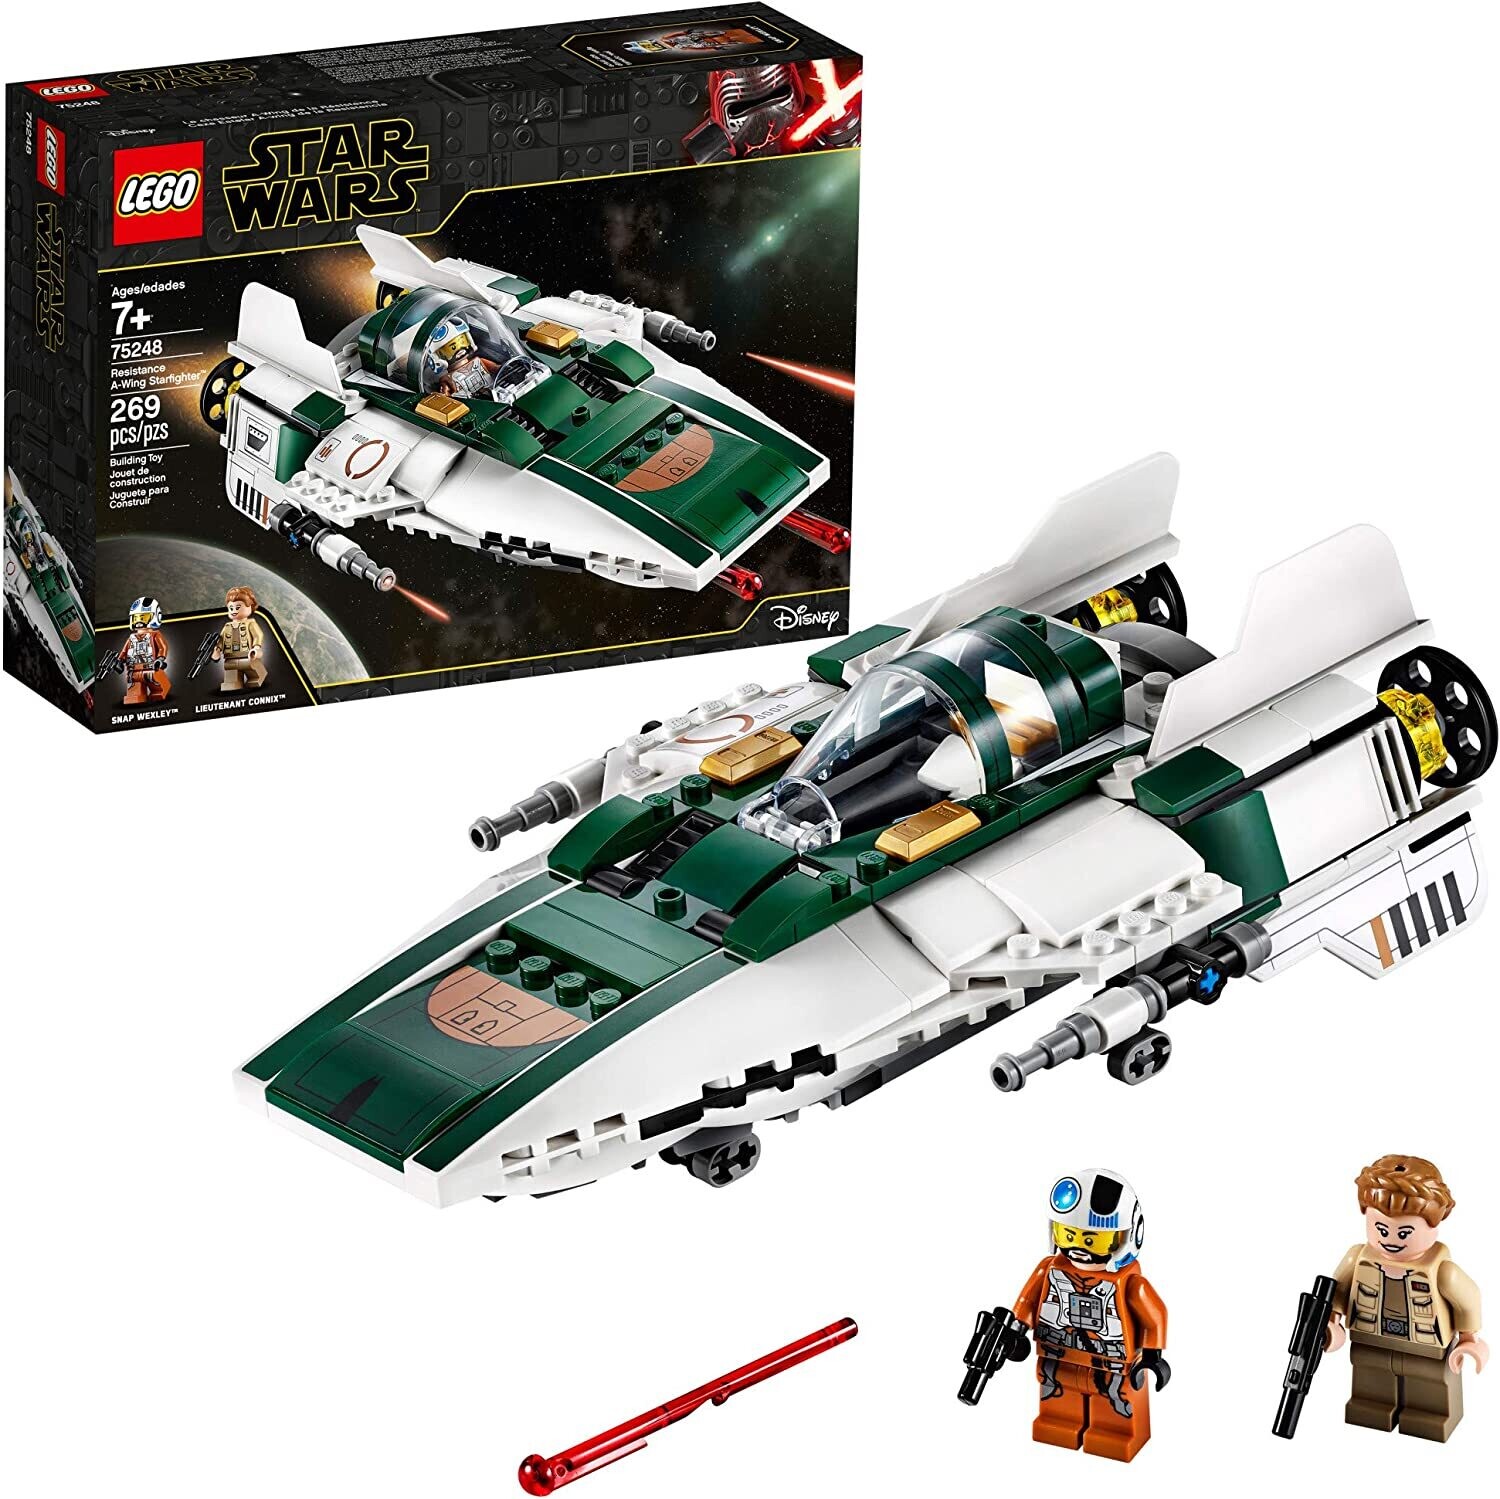 Lego 75248 Star Wars Resistance A-Wing Starfighter